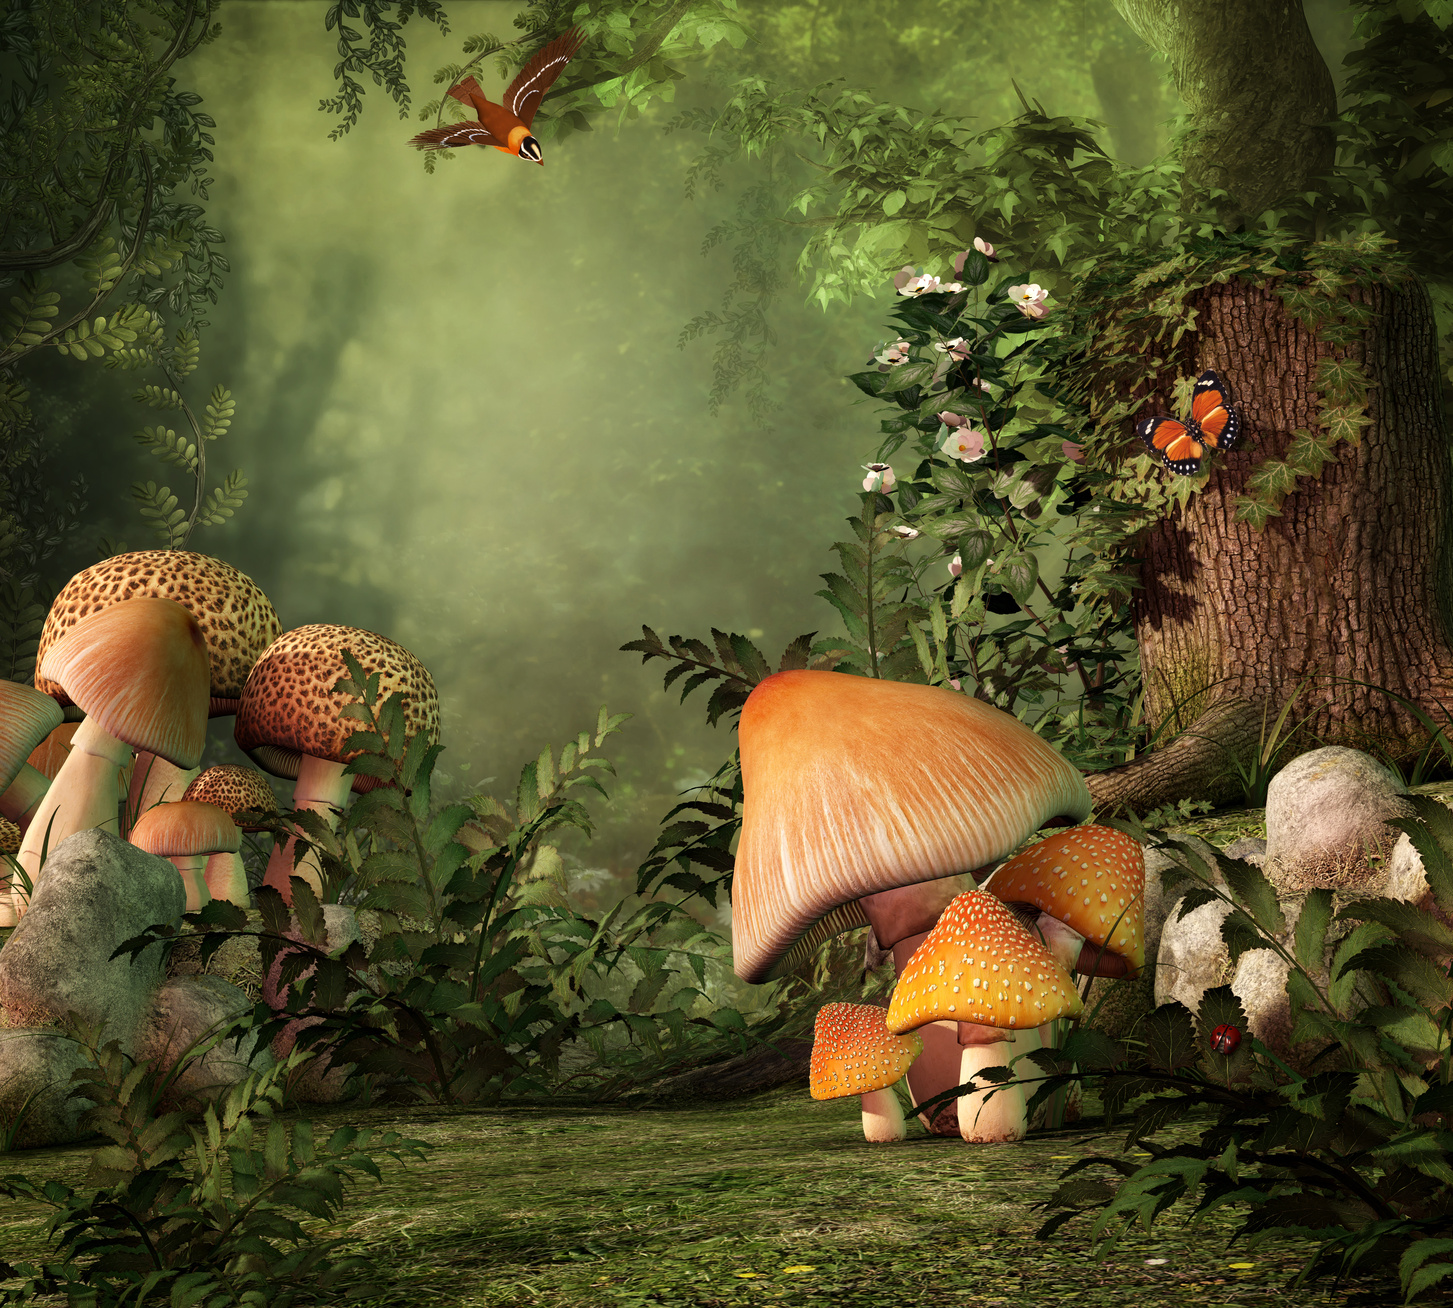 Fantasy Picture of Nature Mushrooms and things that can cause allergies